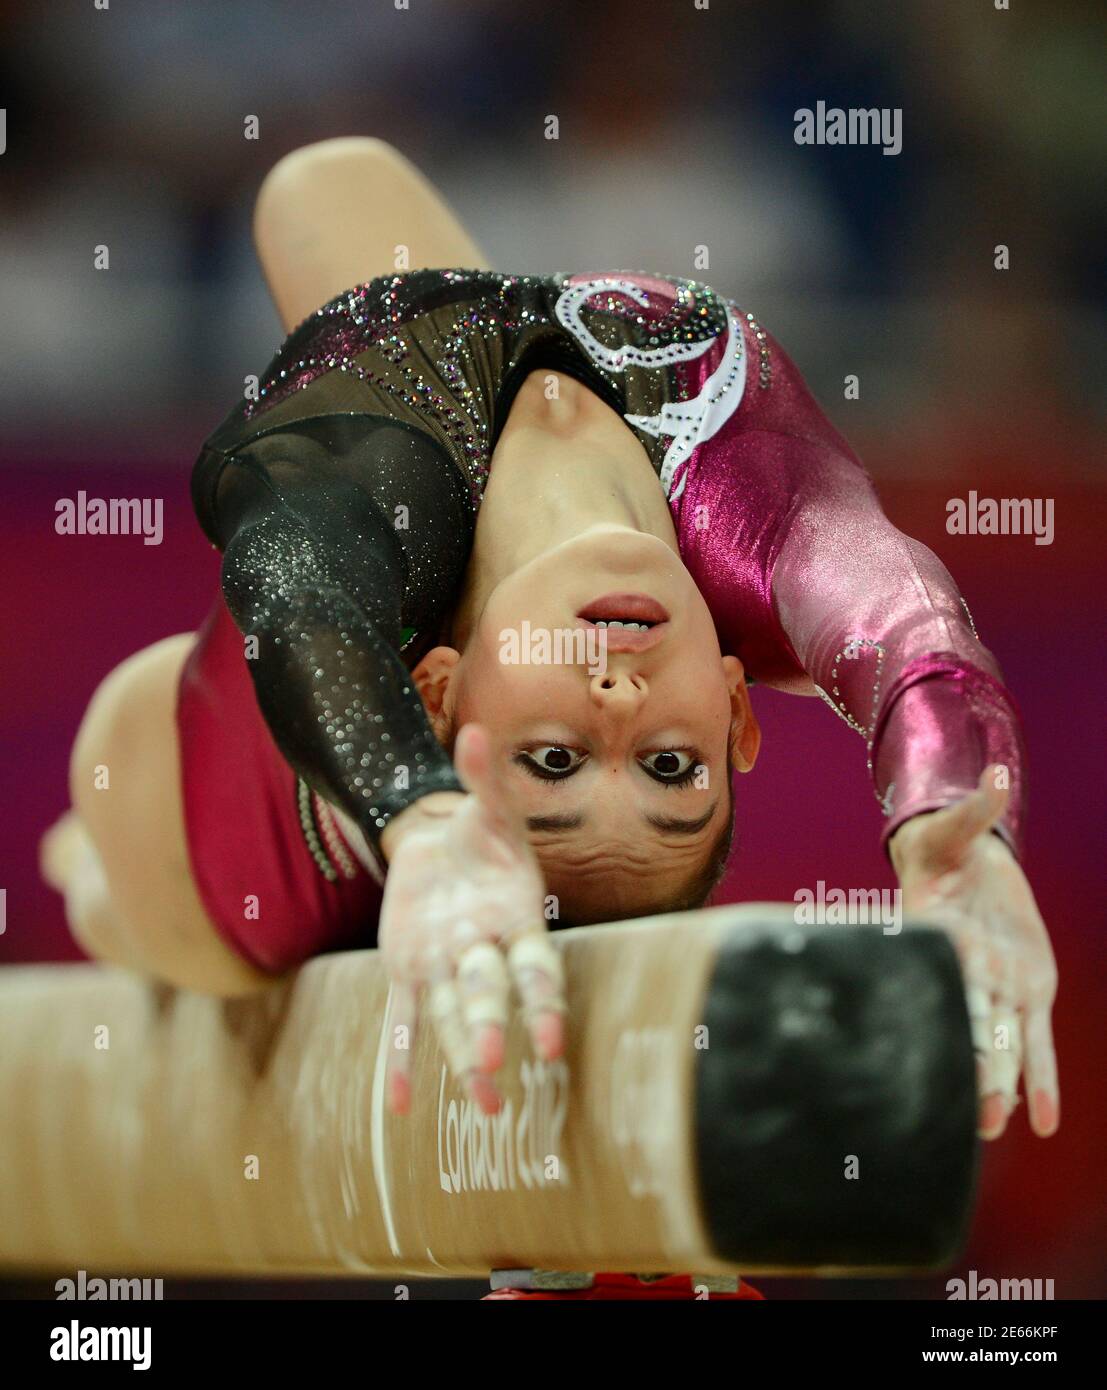 Elsa Garcia Rodriguez Blancas Of Mexico Performs On The Balance Beam During The Women S